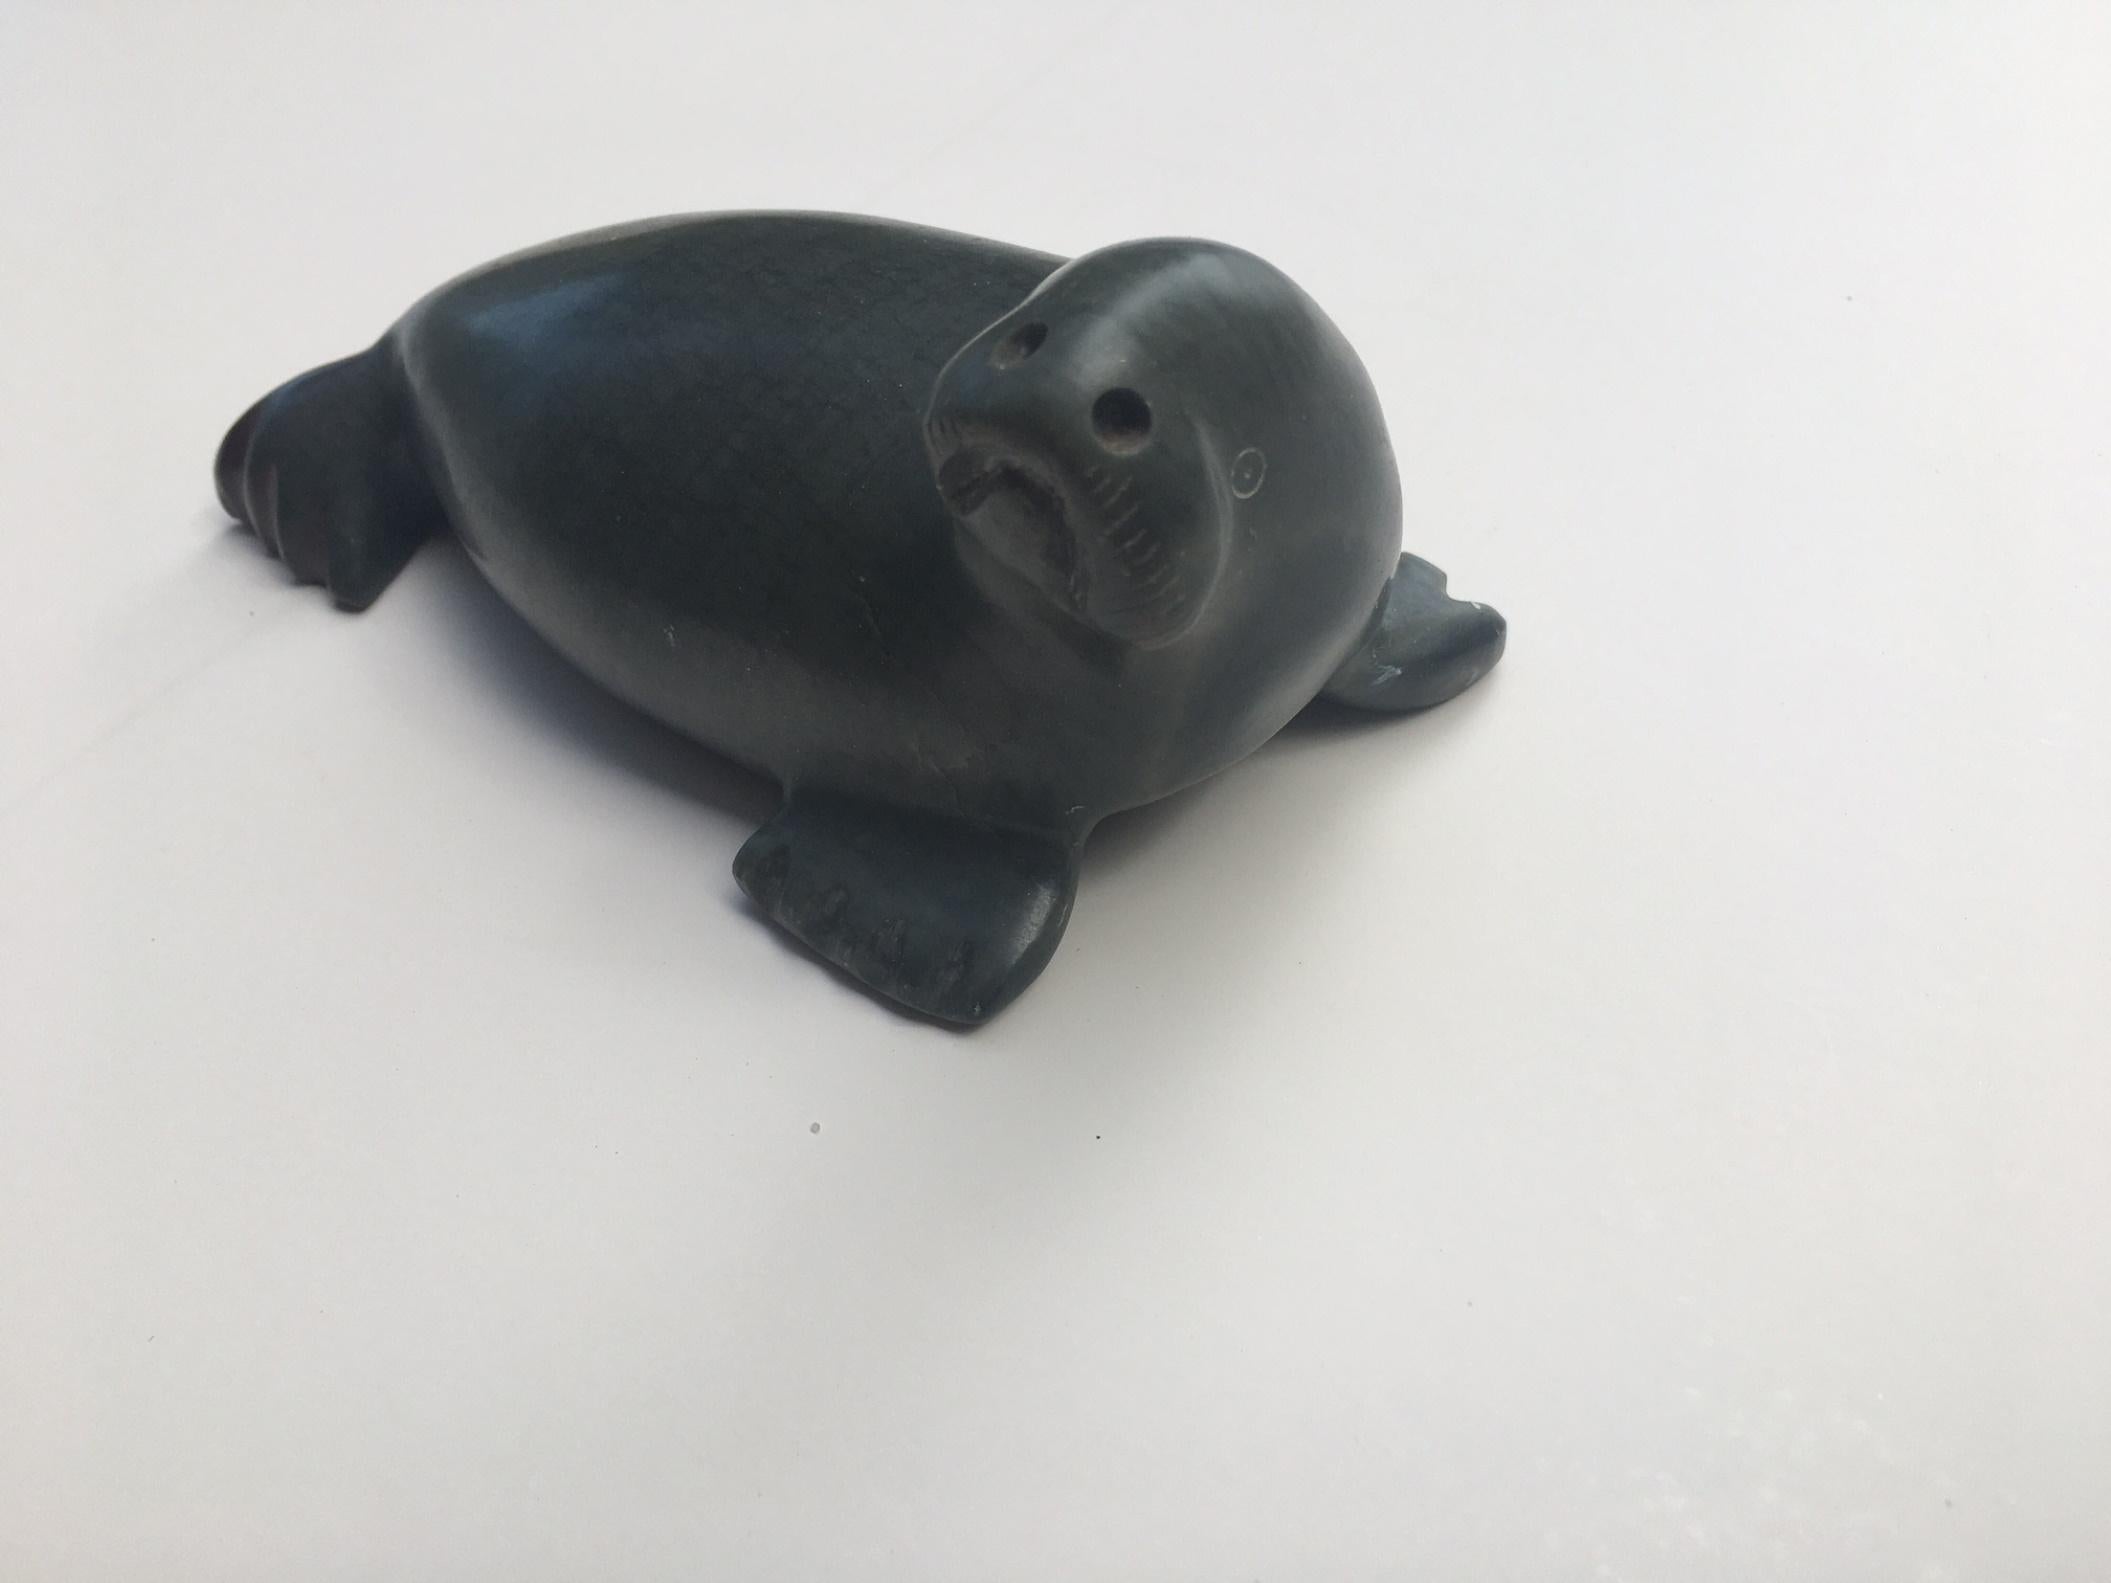 Inuit Stone Seal sculpture carving by Pauta Saila 1916 - 2009

Excellent and smooth polished stone carving of a seal. It is perfectly sculpted in a reclining position with its head lifted. An expressive face with nostrils and beard, shows great